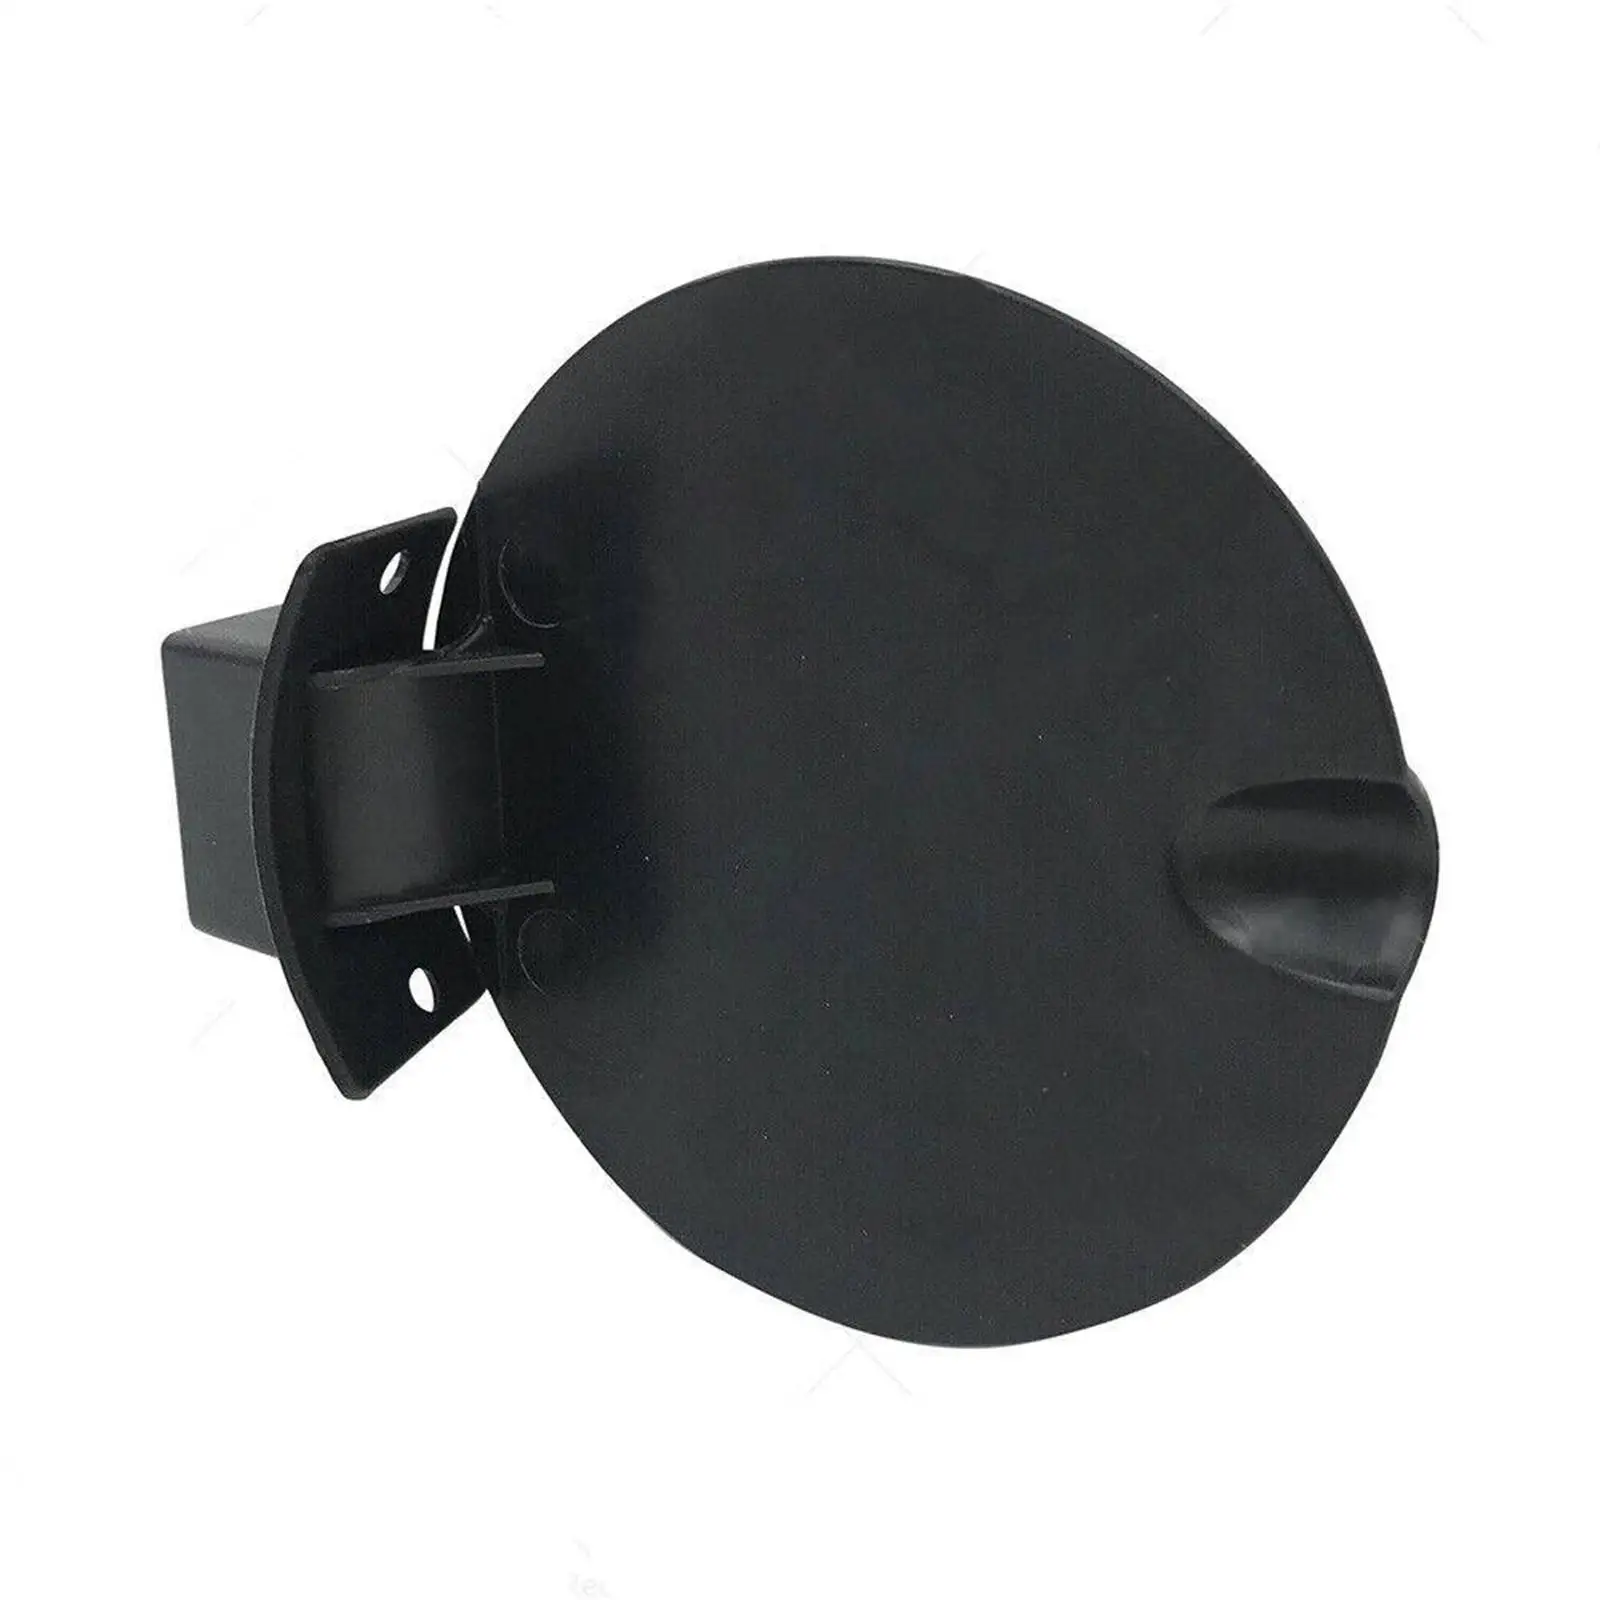 Fuel Filler Flap Modification Accessories Fuel Filler Flap Cover Lid for Holden Ute 2000 to 2007 VU Vy Vz Professional